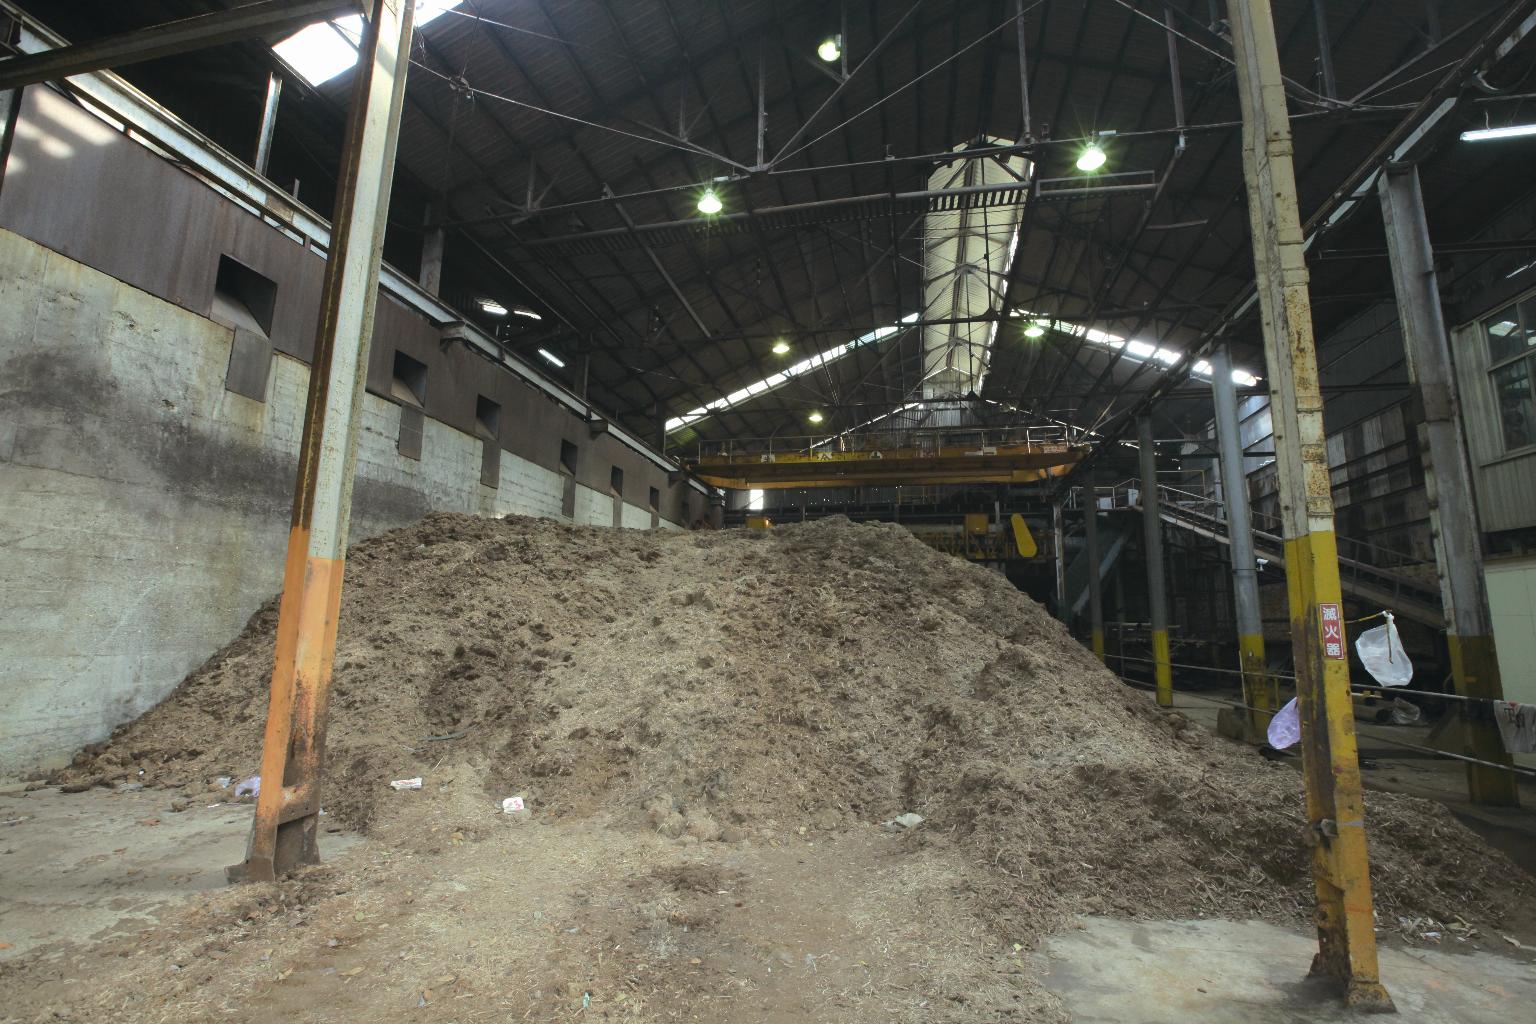 Bagasse in the storage.